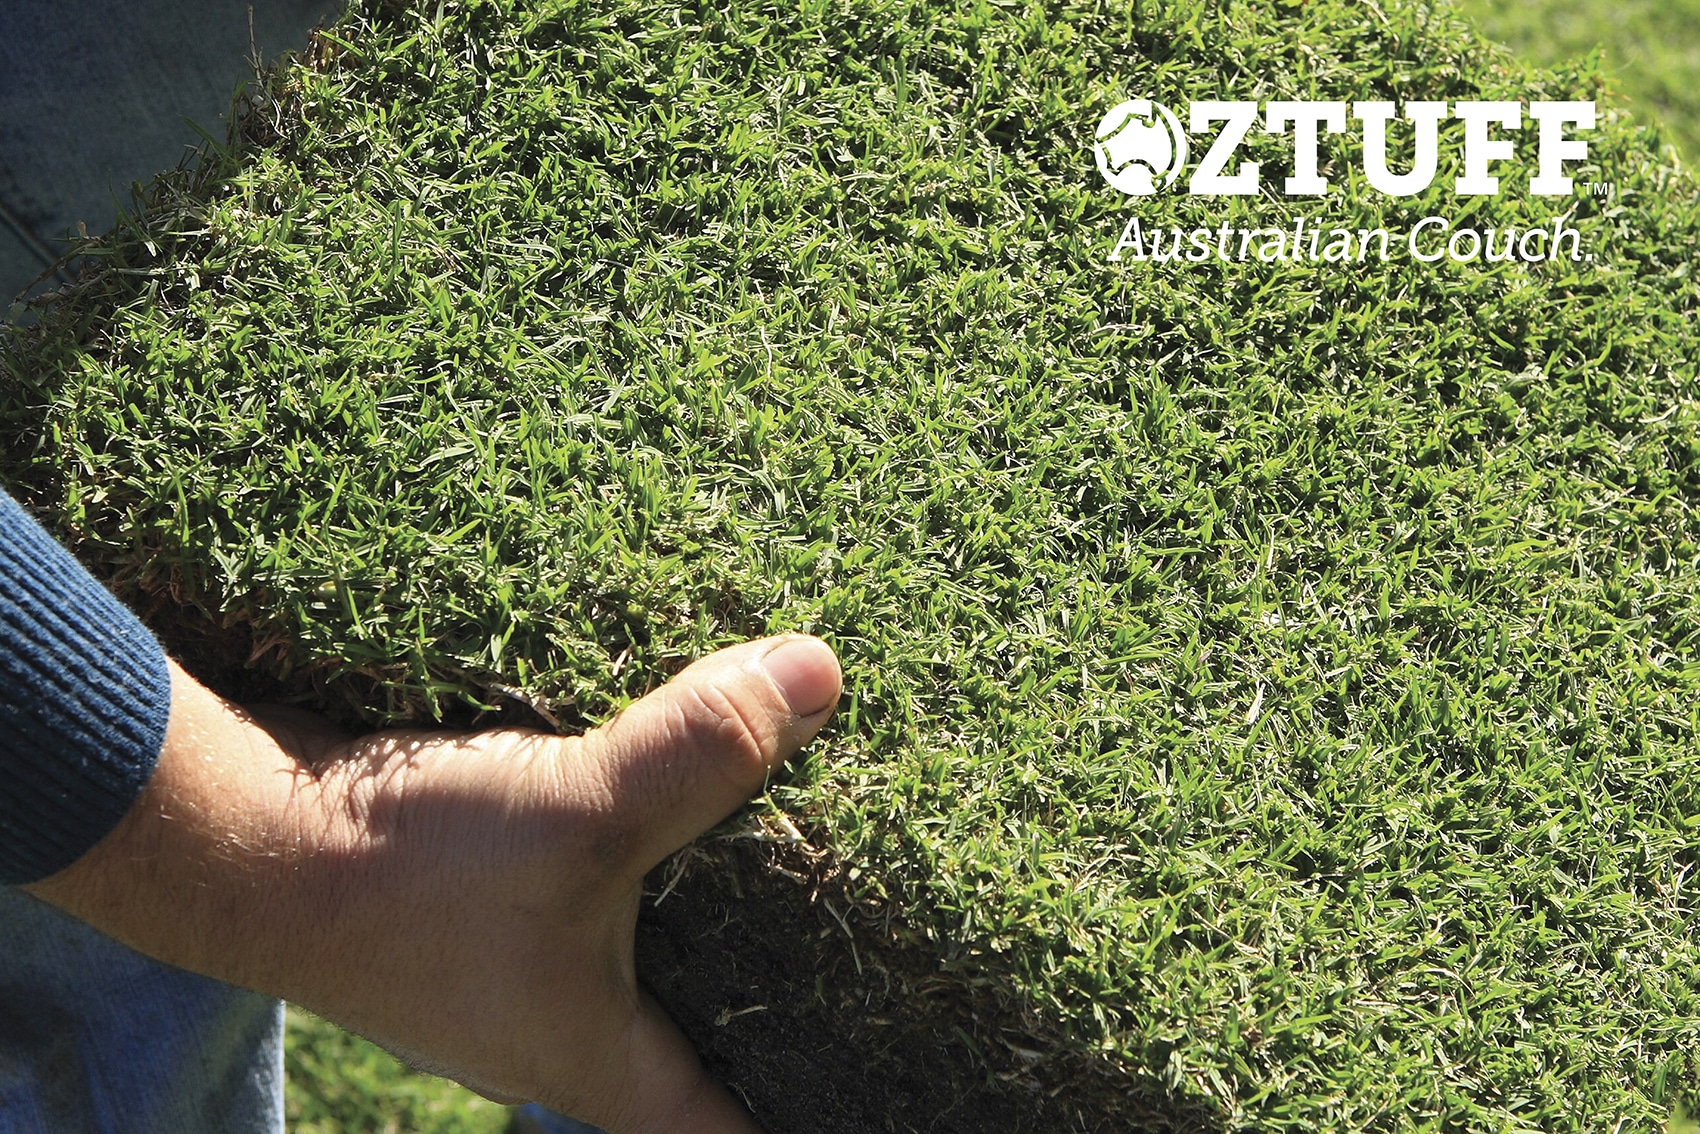 OzTuff Couch Natural Turf All About Turf sports couch